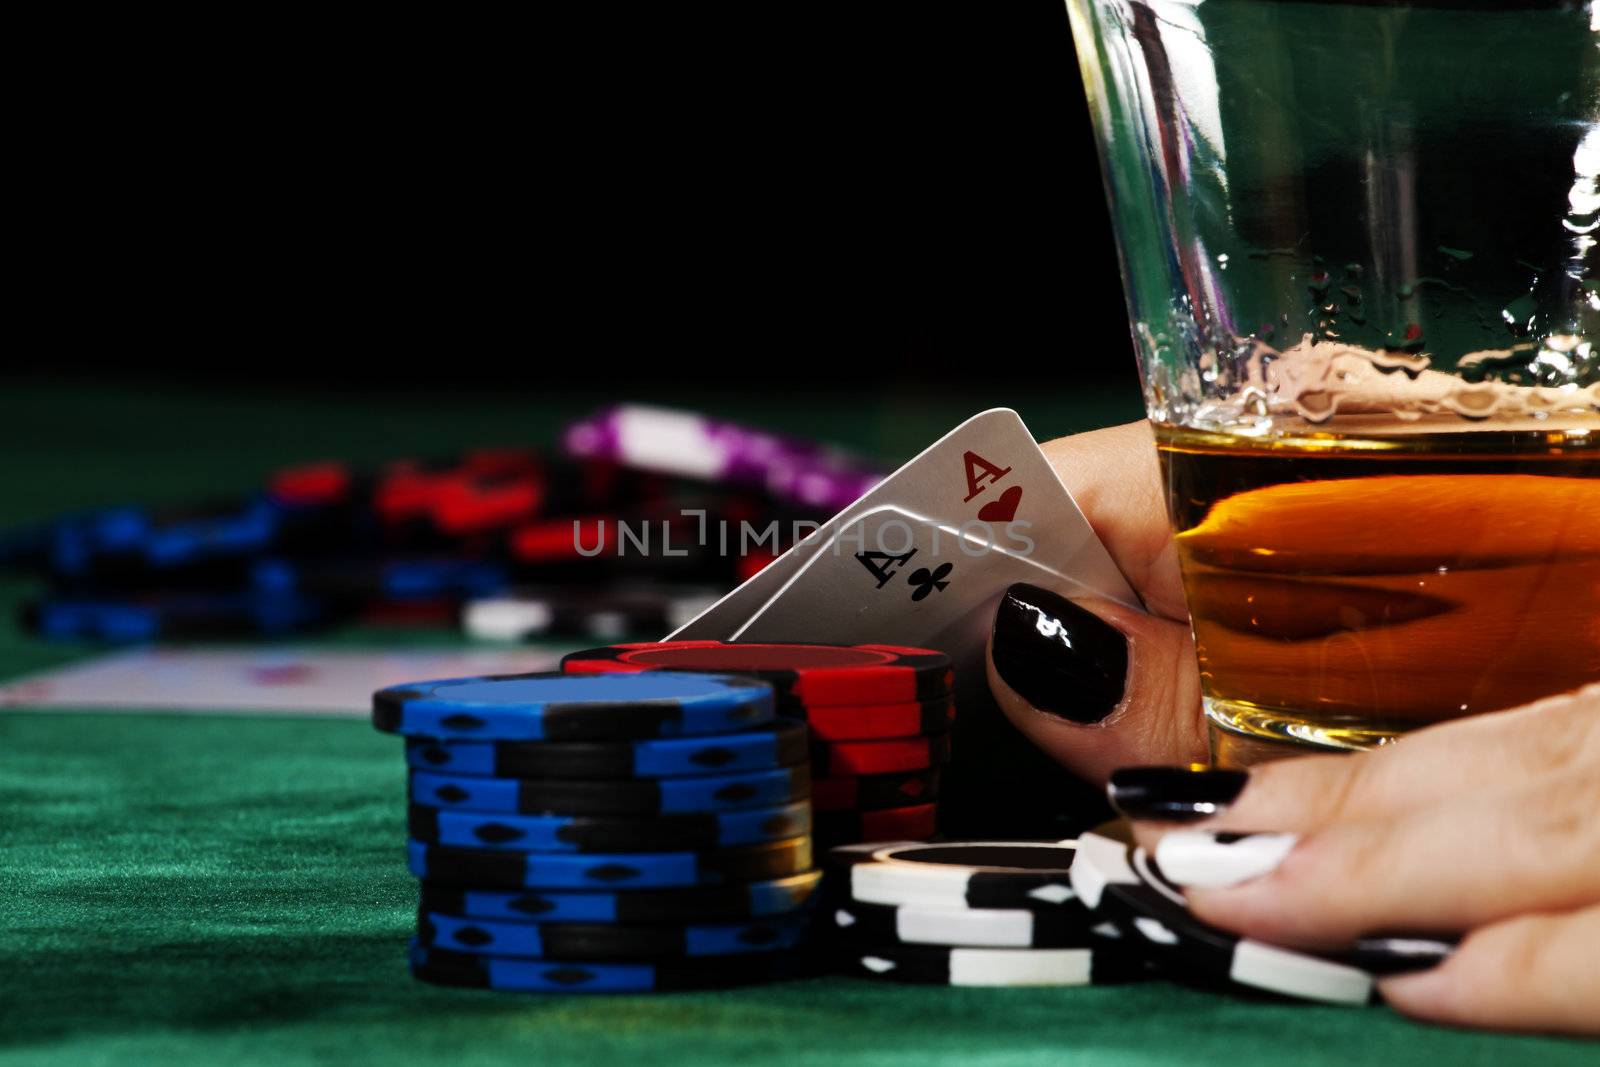 Lady with black manicure holding a great poker hand next to a glass of whisky.